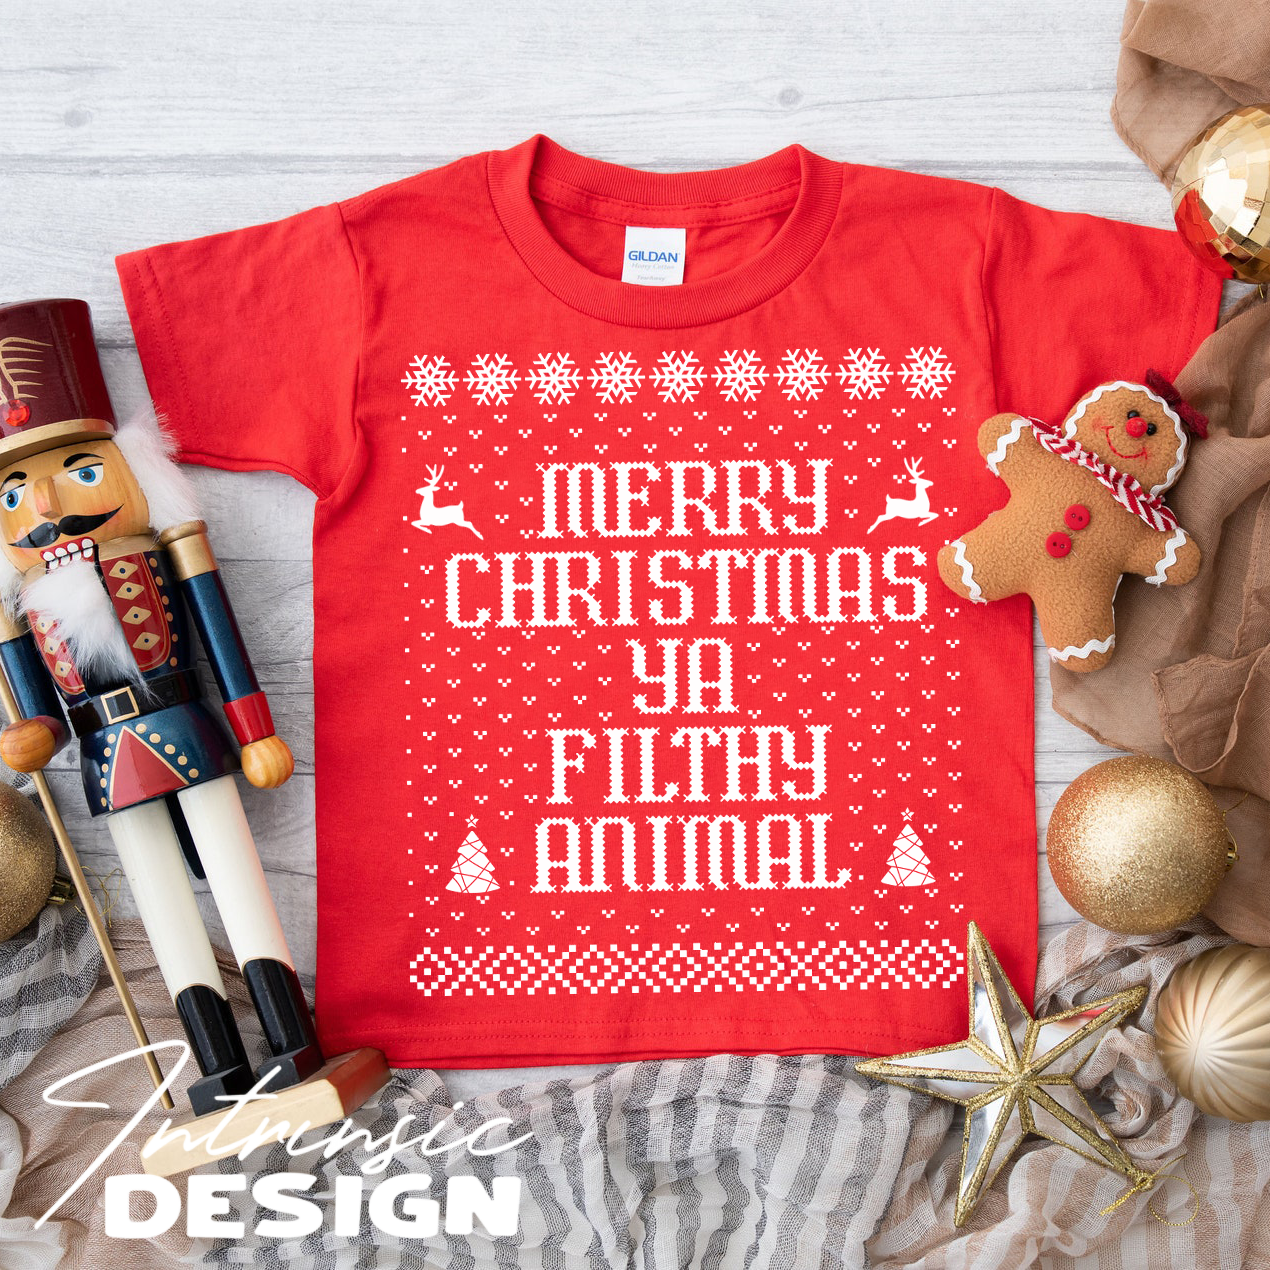 Filthy animal ugly sweater tee